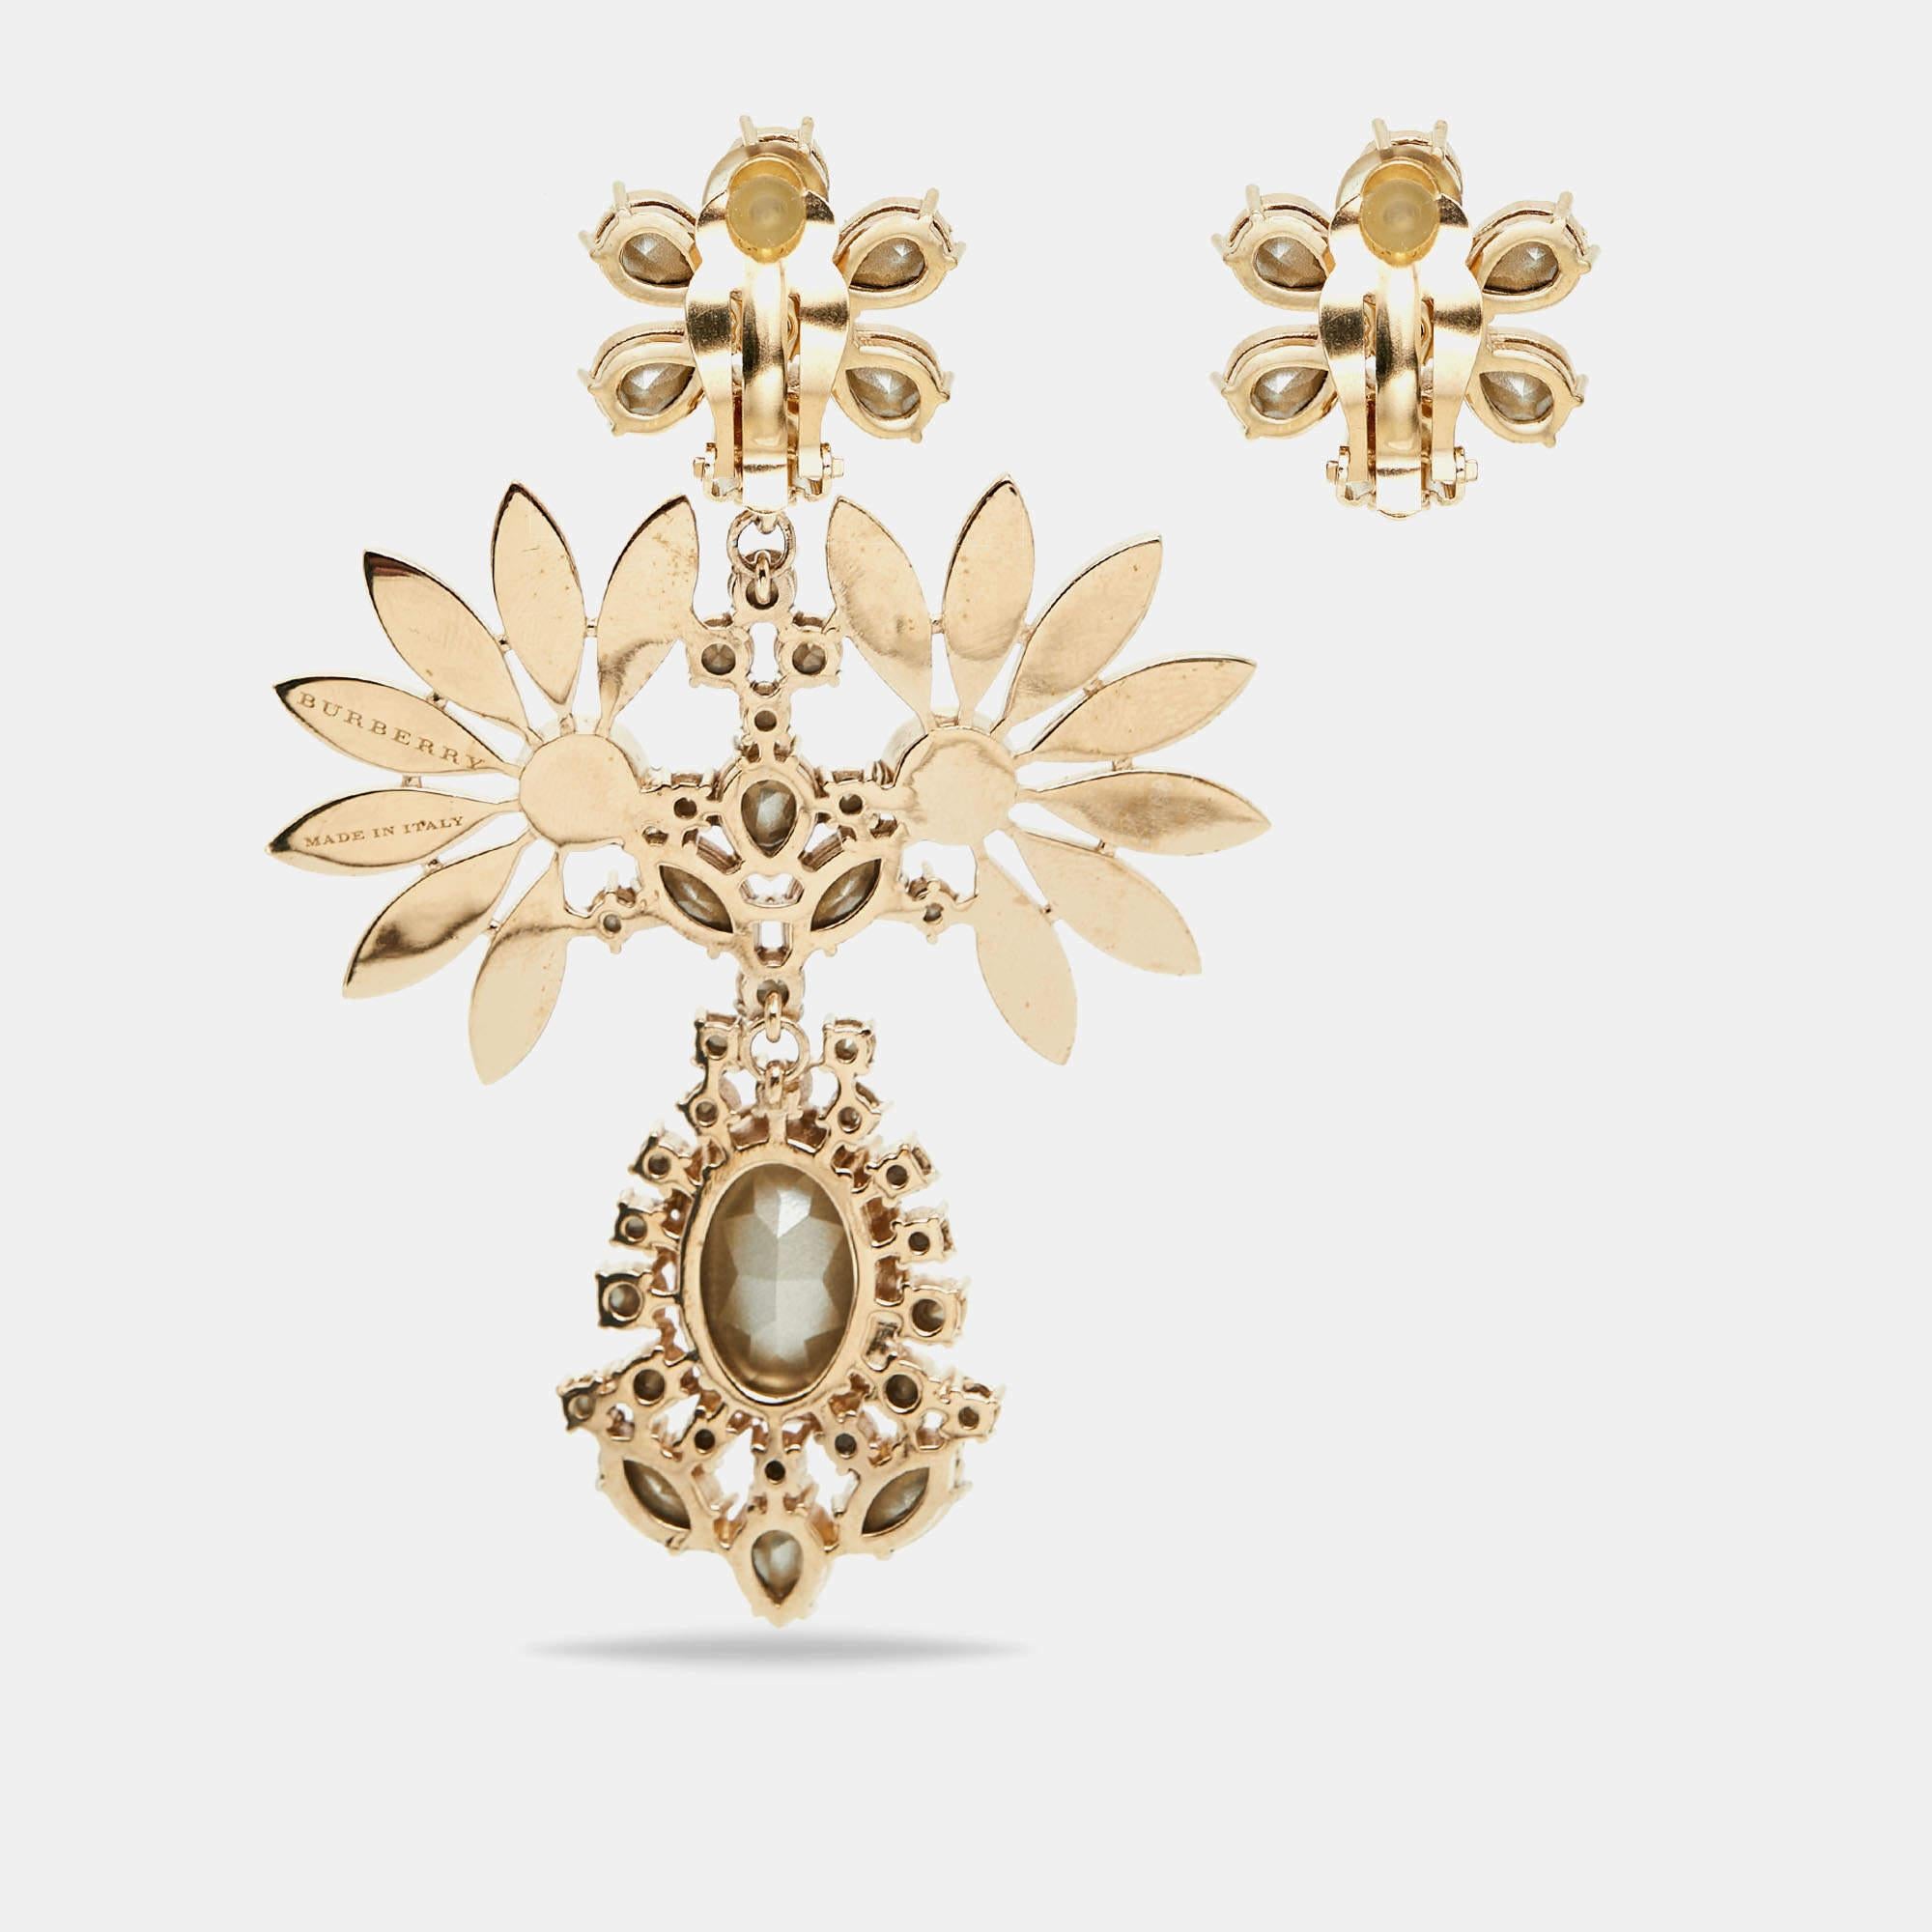 Mismatched, sparkly, and breathtaking! These asymmetric earrings from Burberry tug at one's heartstrings in the most special way. Sculpted from gold-tone metal and lit by crystals, the pair comes as stud flowers but one of them has an exaggerated